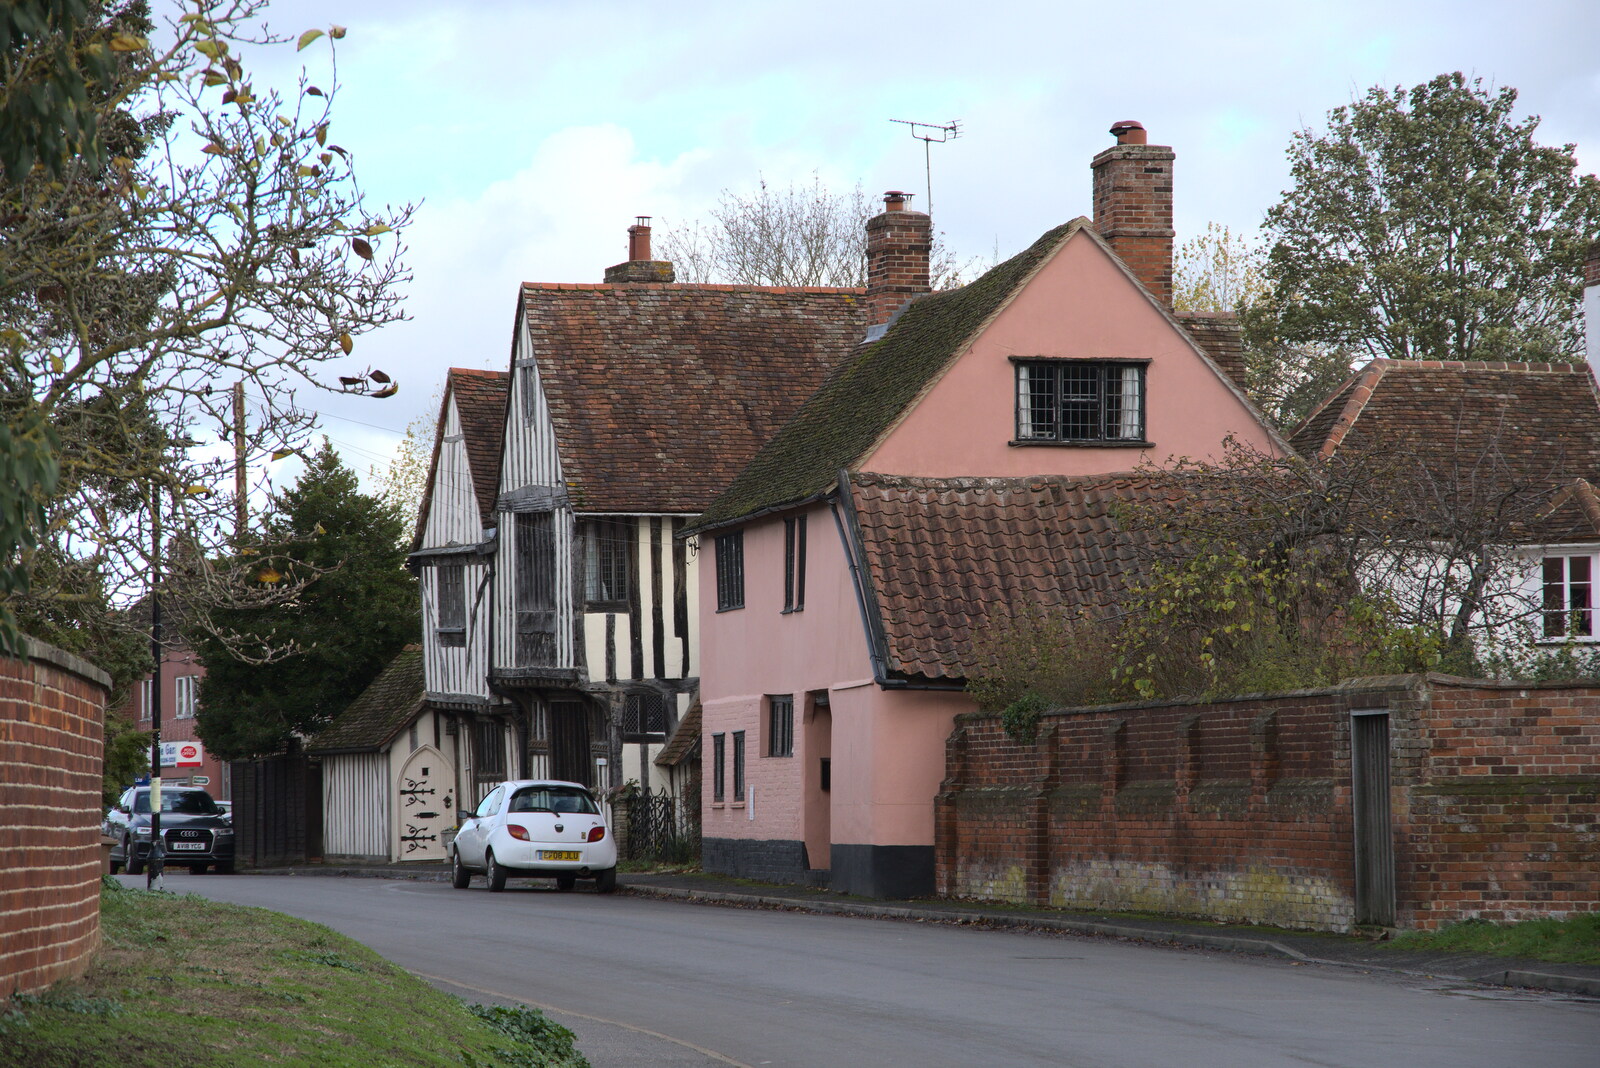 A Postcard from Flatford and Dedham, Suffolk and Essex, 9th November 2022: More old buildings in Stratford St. Mary